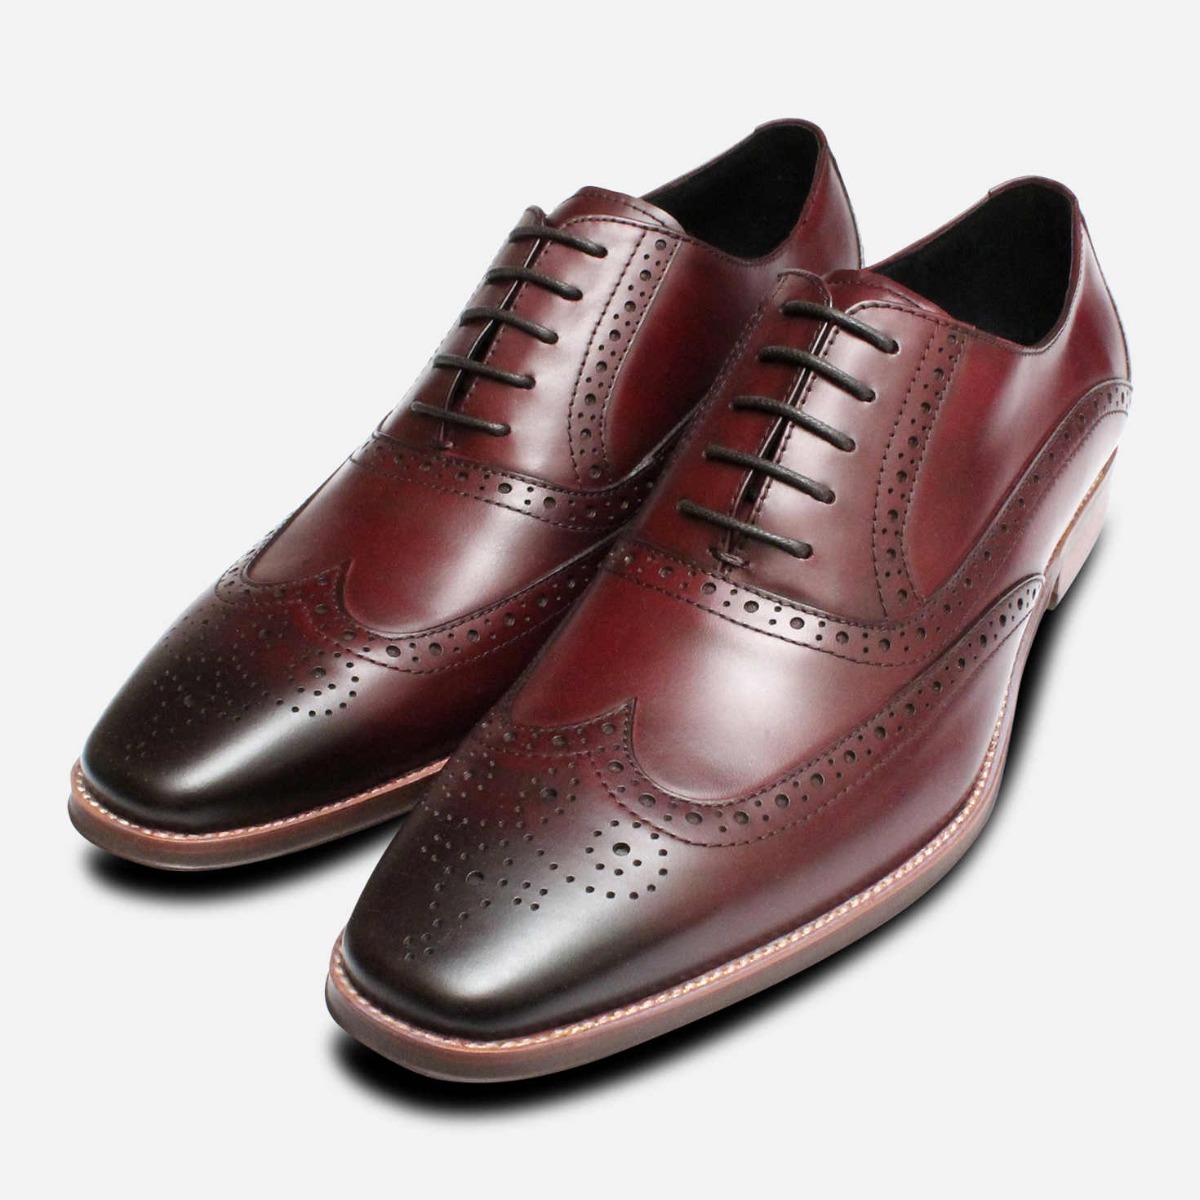 Premium Oxford Brogues in Oxblood by 